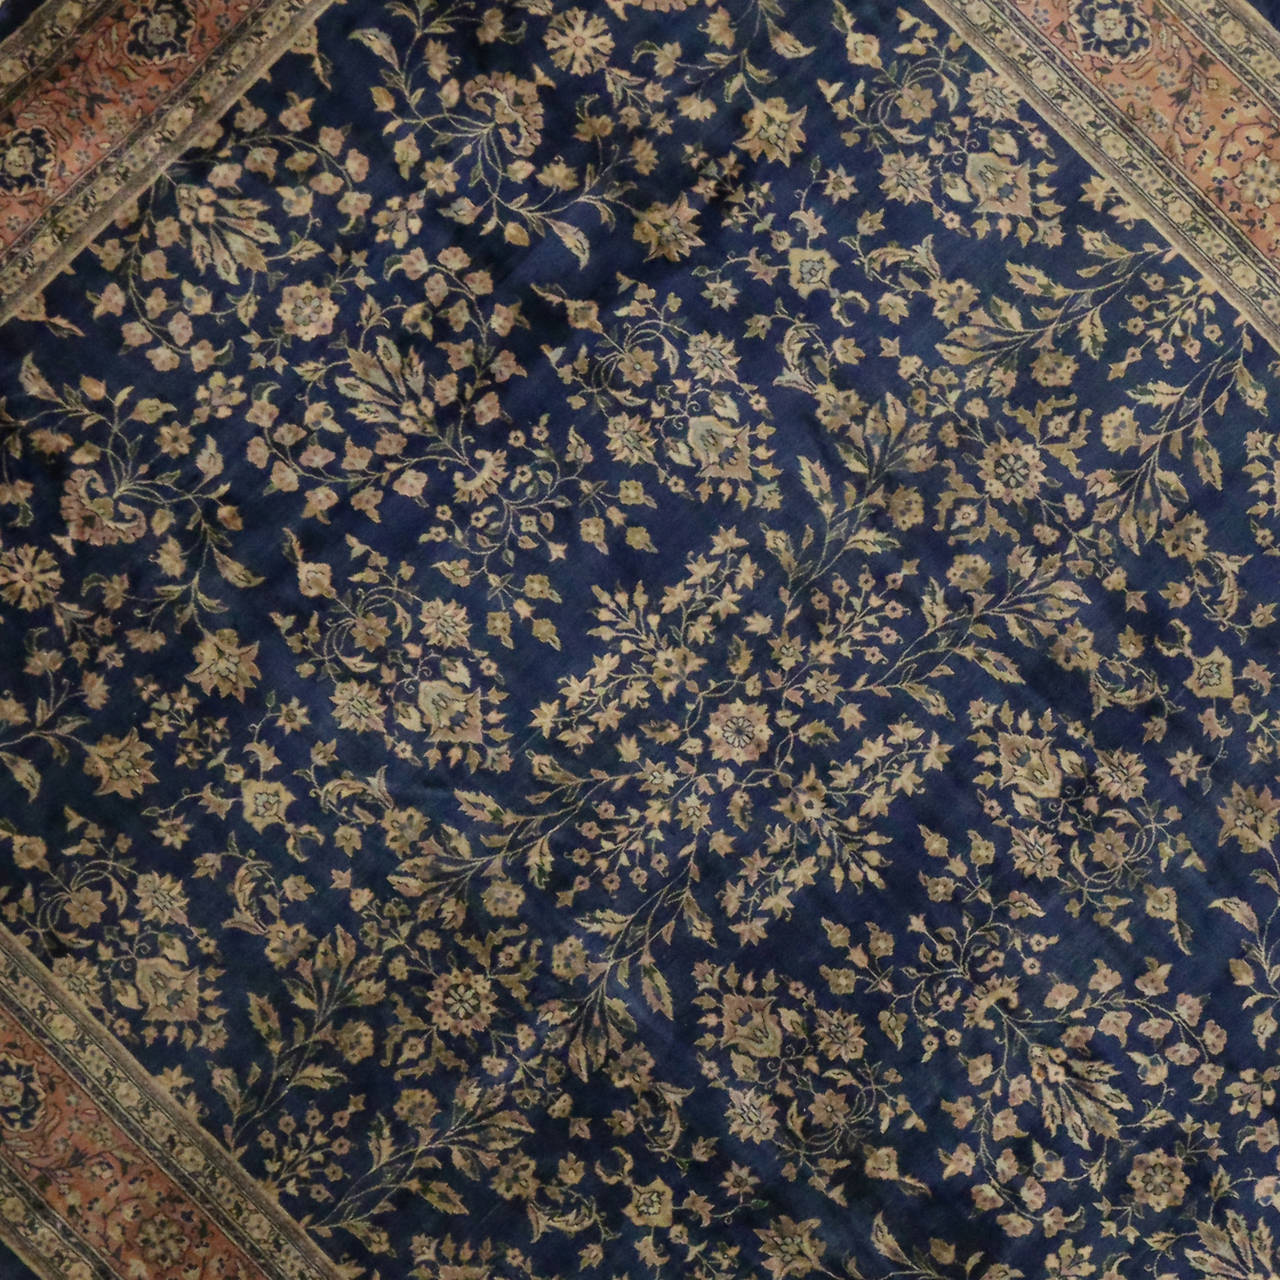 This antique Agra was hand knotted in India during the early twentieth century. It features a traditional, yet elegant composition characterized by an allover pattern unfolding a balanced palette of navy blue, muted rust, ivory and shades of green